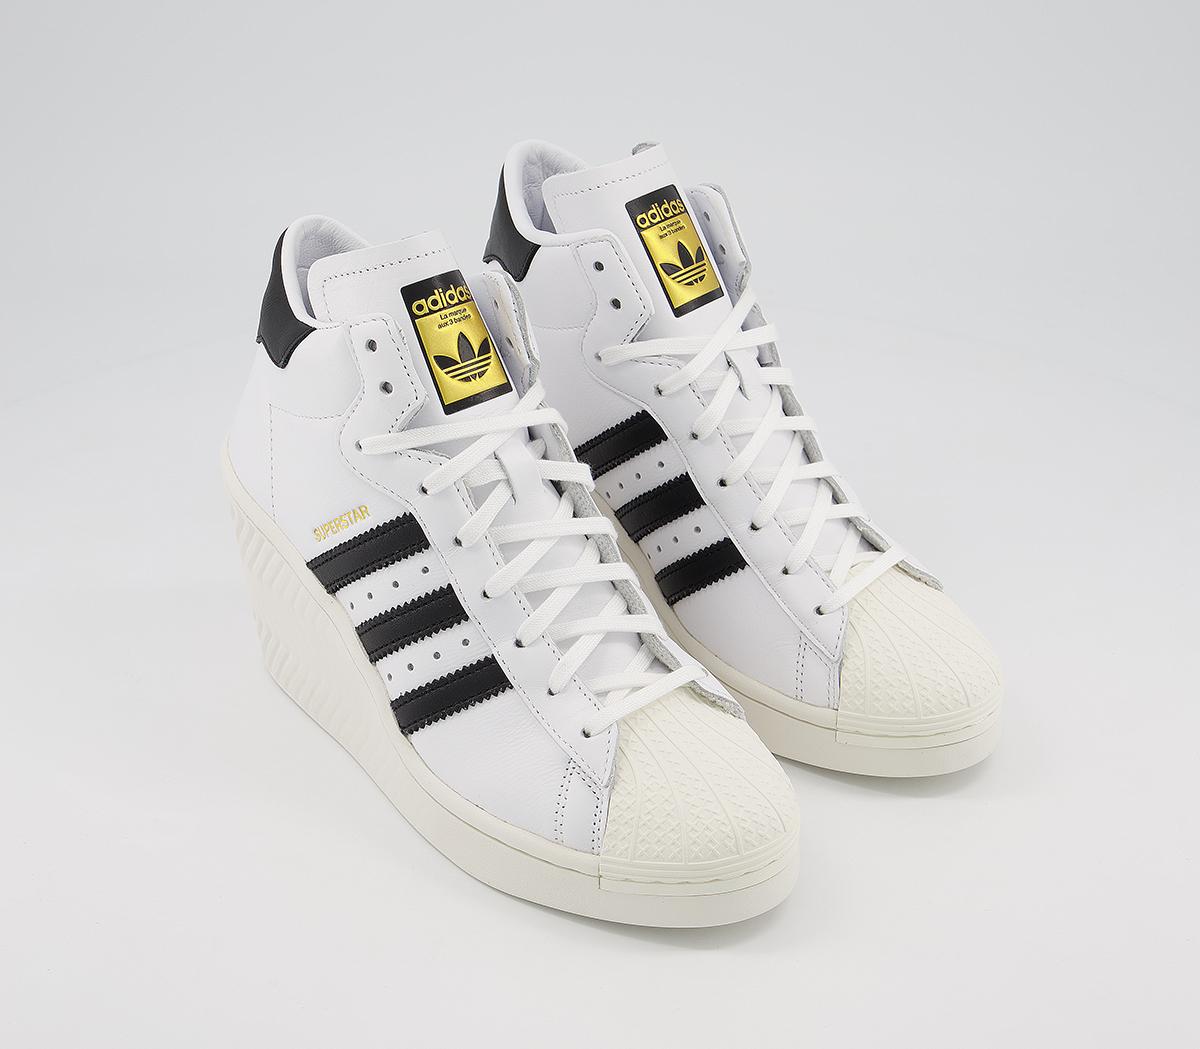 adidas Superstar Ellure White Core Black Off White - Hers trainers